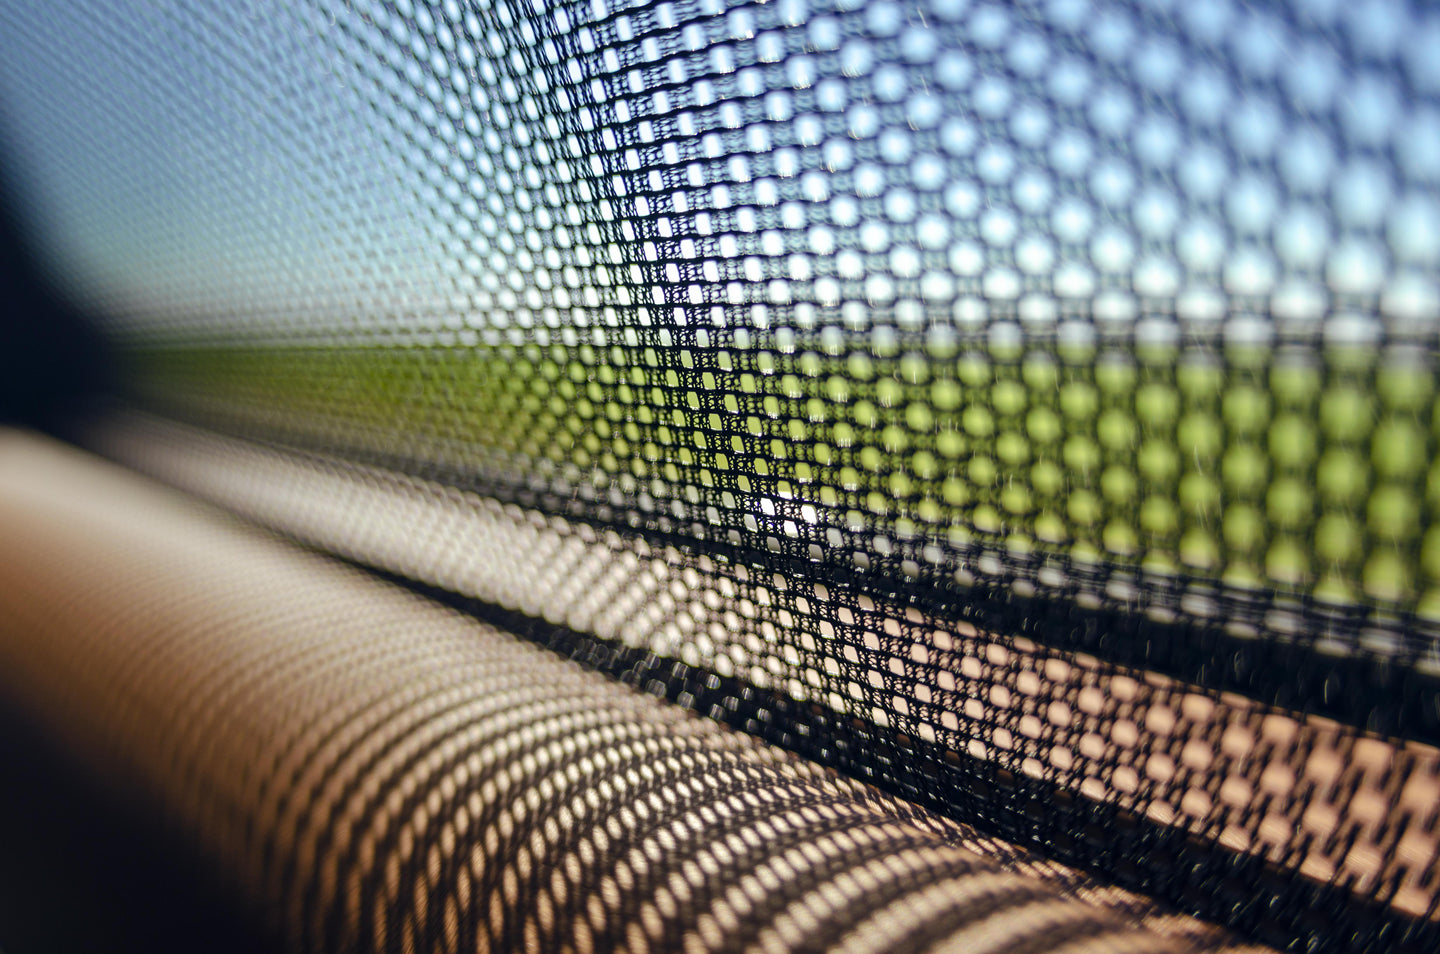 FAST BLINDS SCREEN (Oversize - above 90